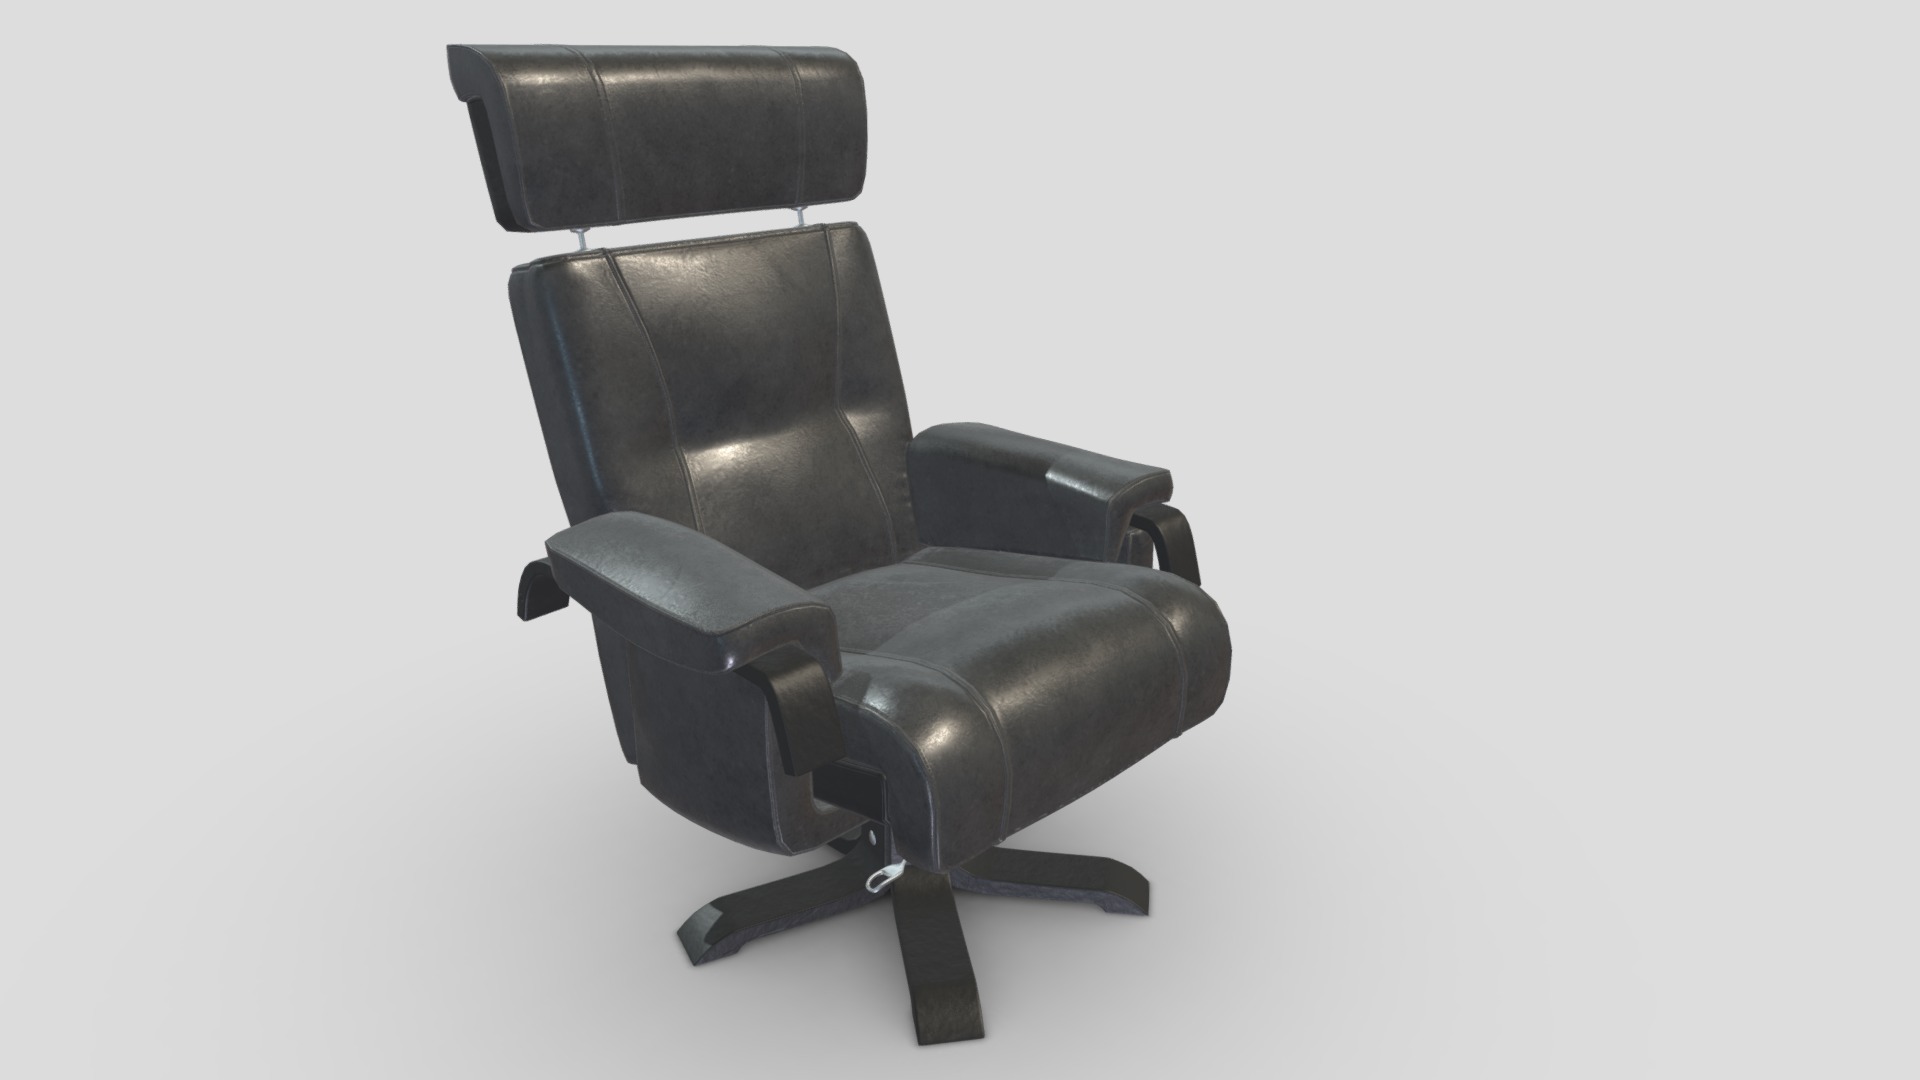 3D model Arm Chair 06 - This is a 3D model of the Arm Chair 06. The 3D model is about a black office chair.